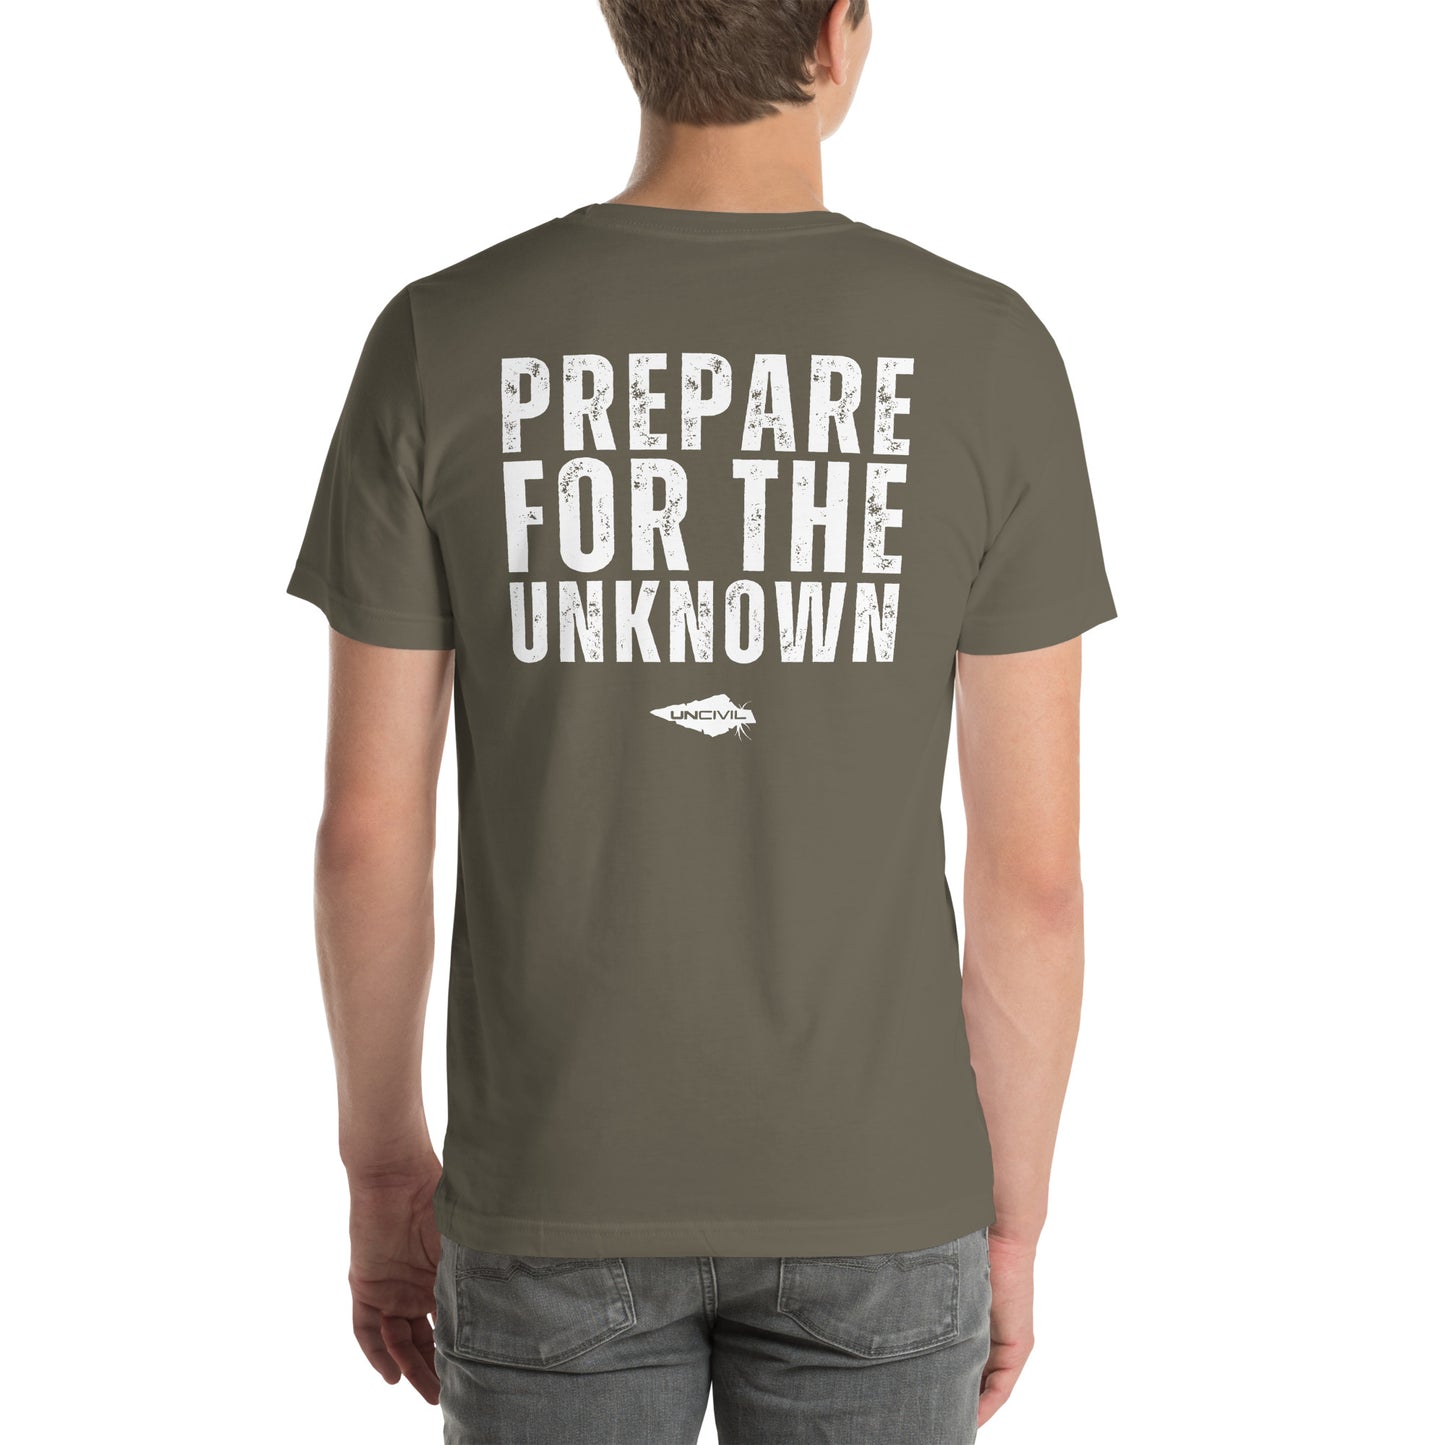 Prepare for the Unknown t-shirt UNCIVIL army green